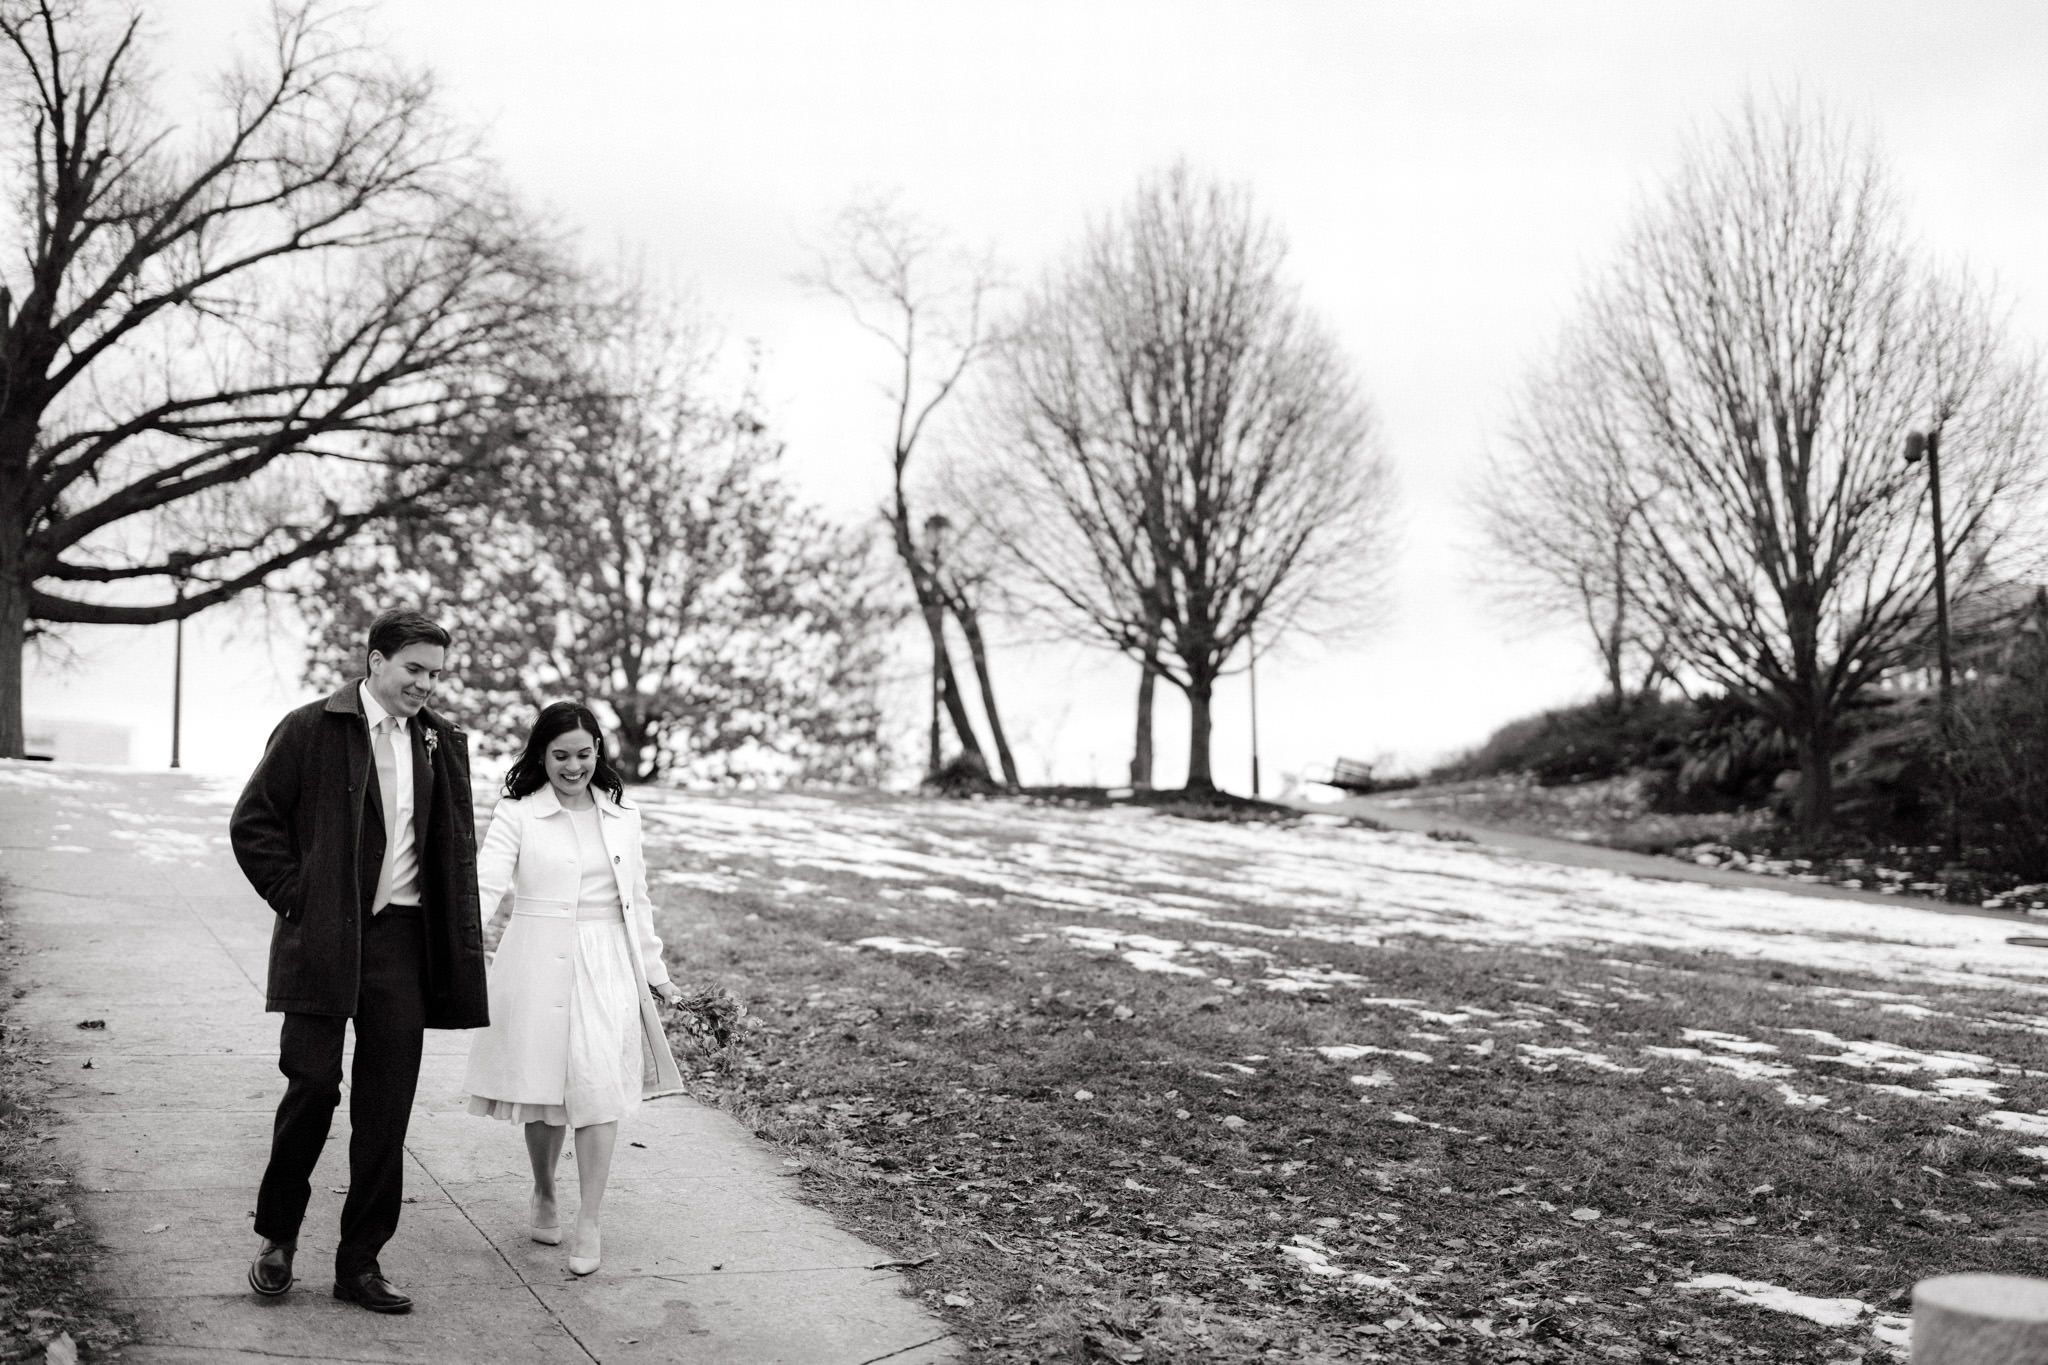 Editorial wedding image of the newly-weds outdoors in the snow. Winter wedding venues image by Jenny Fu Studio